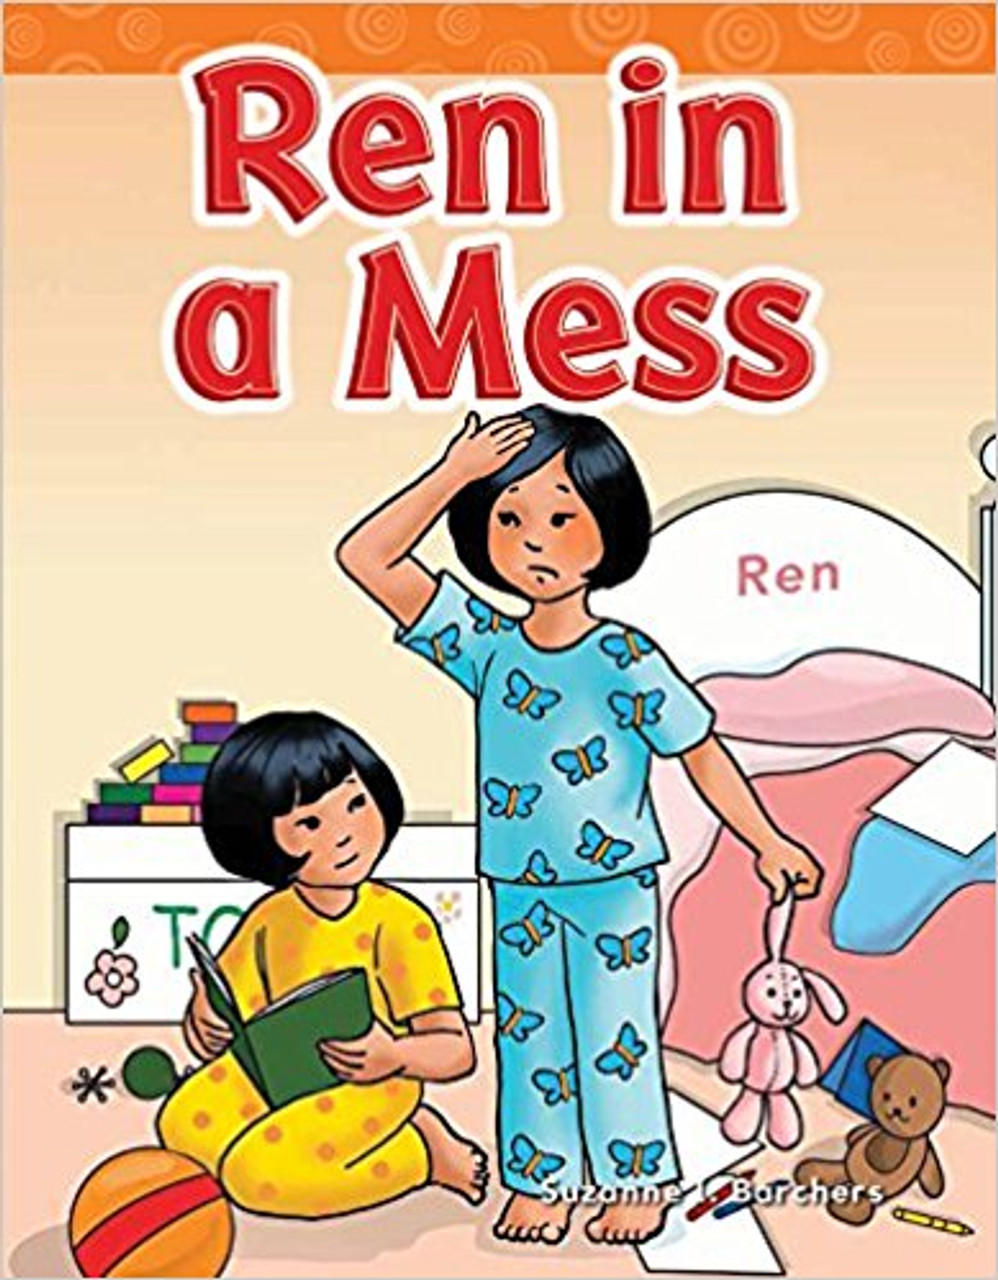 Ren in a Mess by Suzanne I Barchers